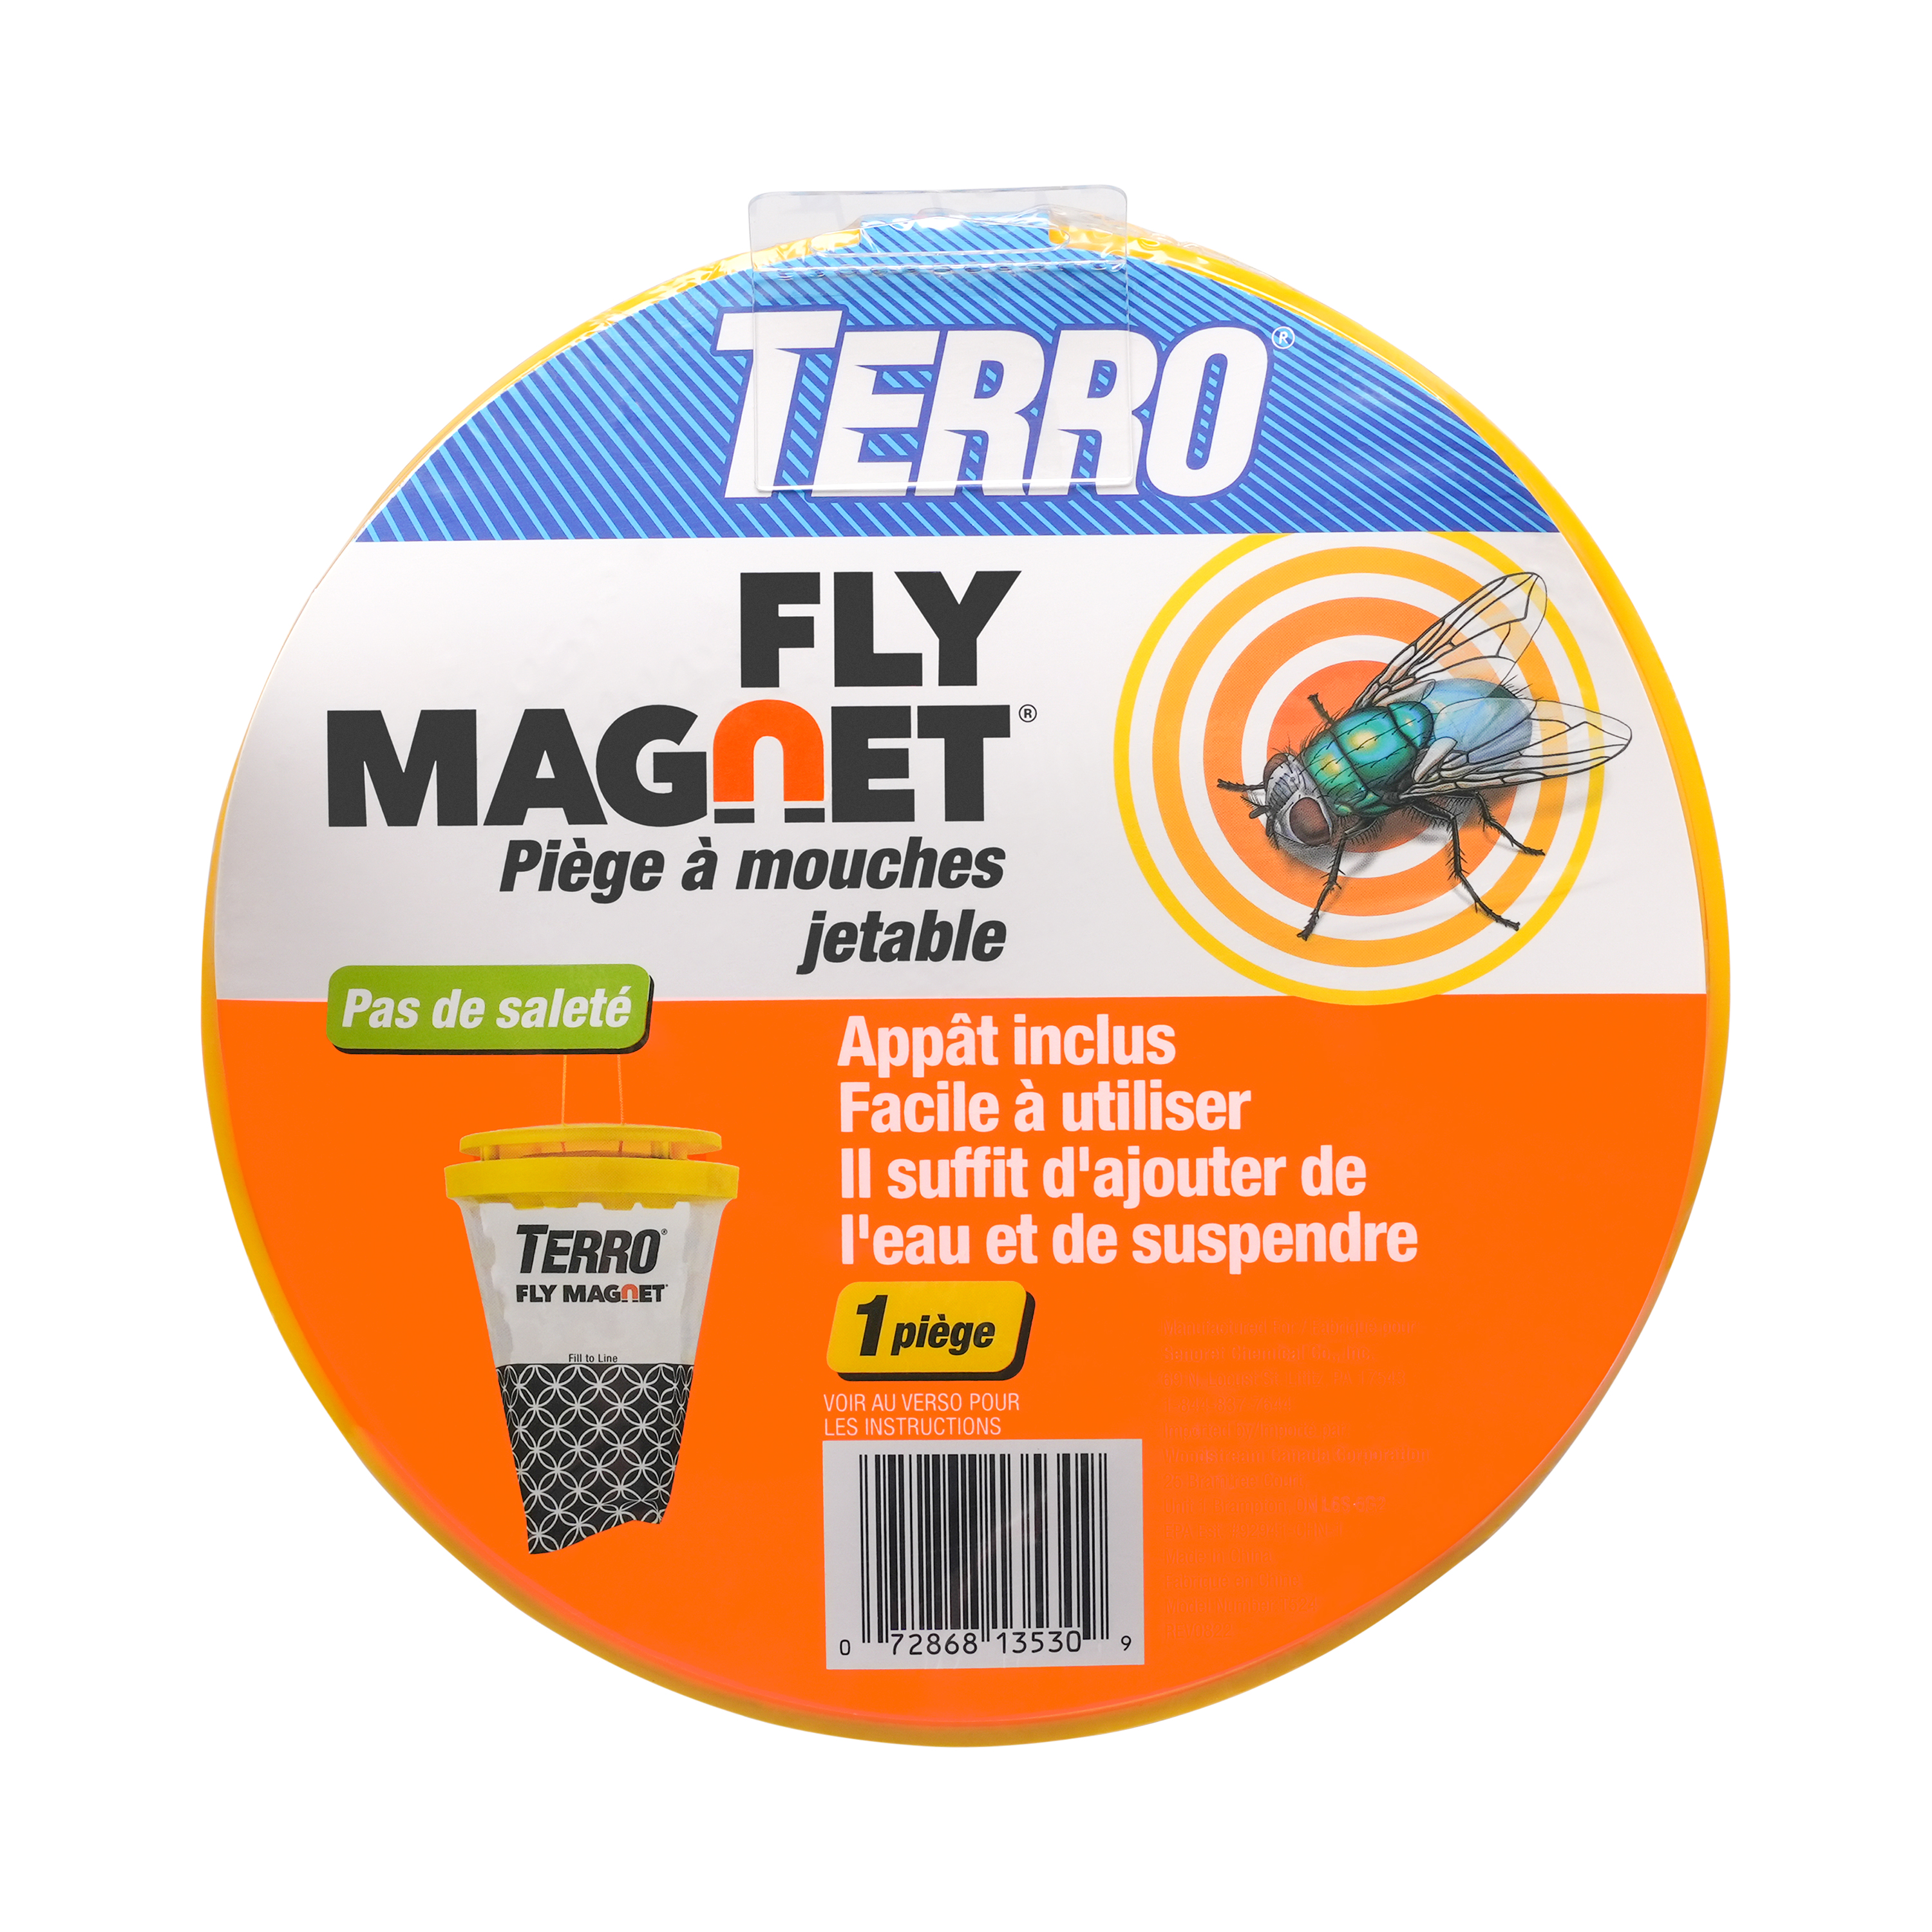 Terro Fly Magnet Disposable Fly Trap - image 3 of 3